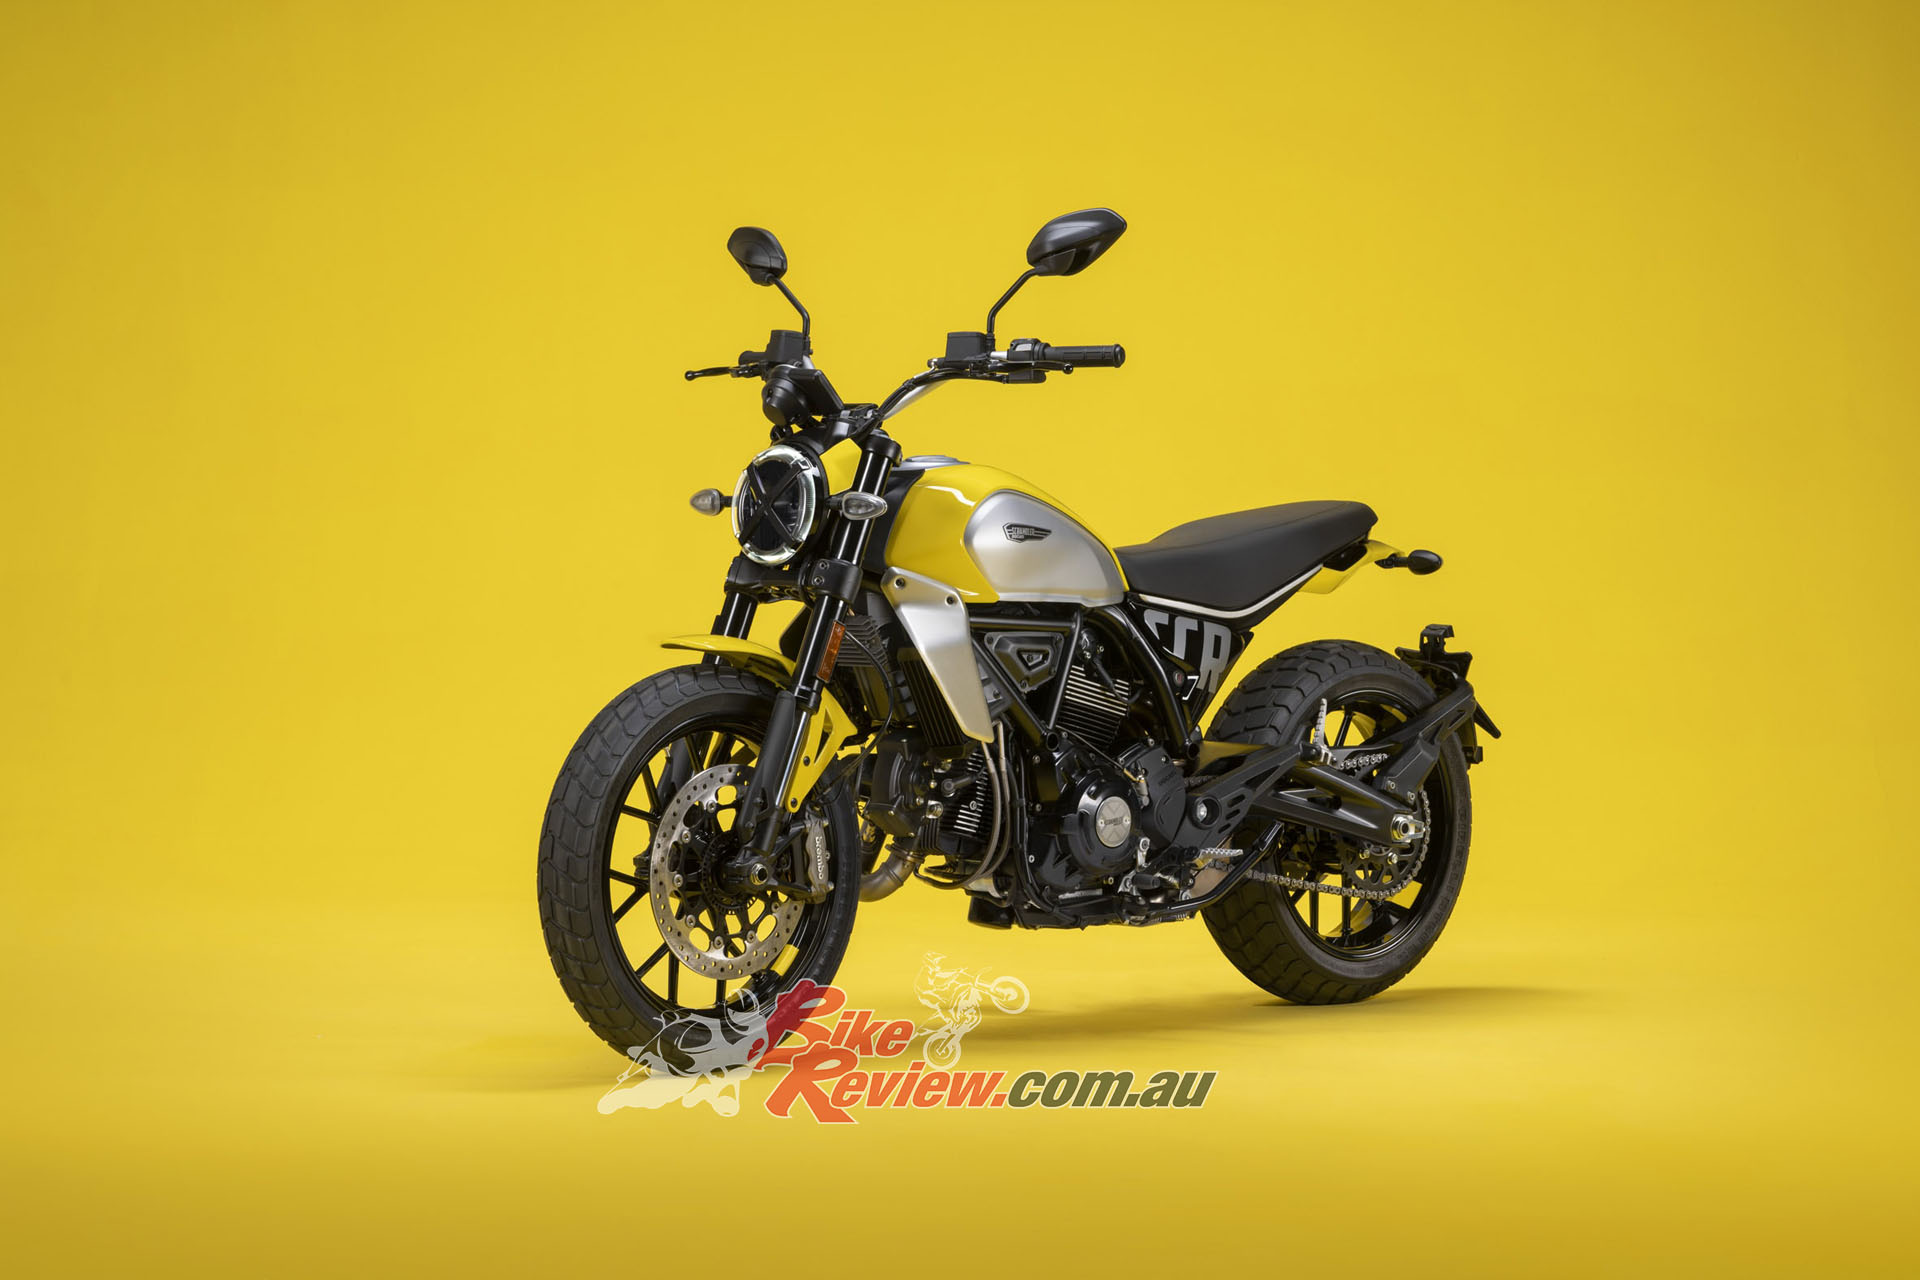 Familiar shape and style with a modern flavour. The popular Scrambler has received some styling updates for 2023. 